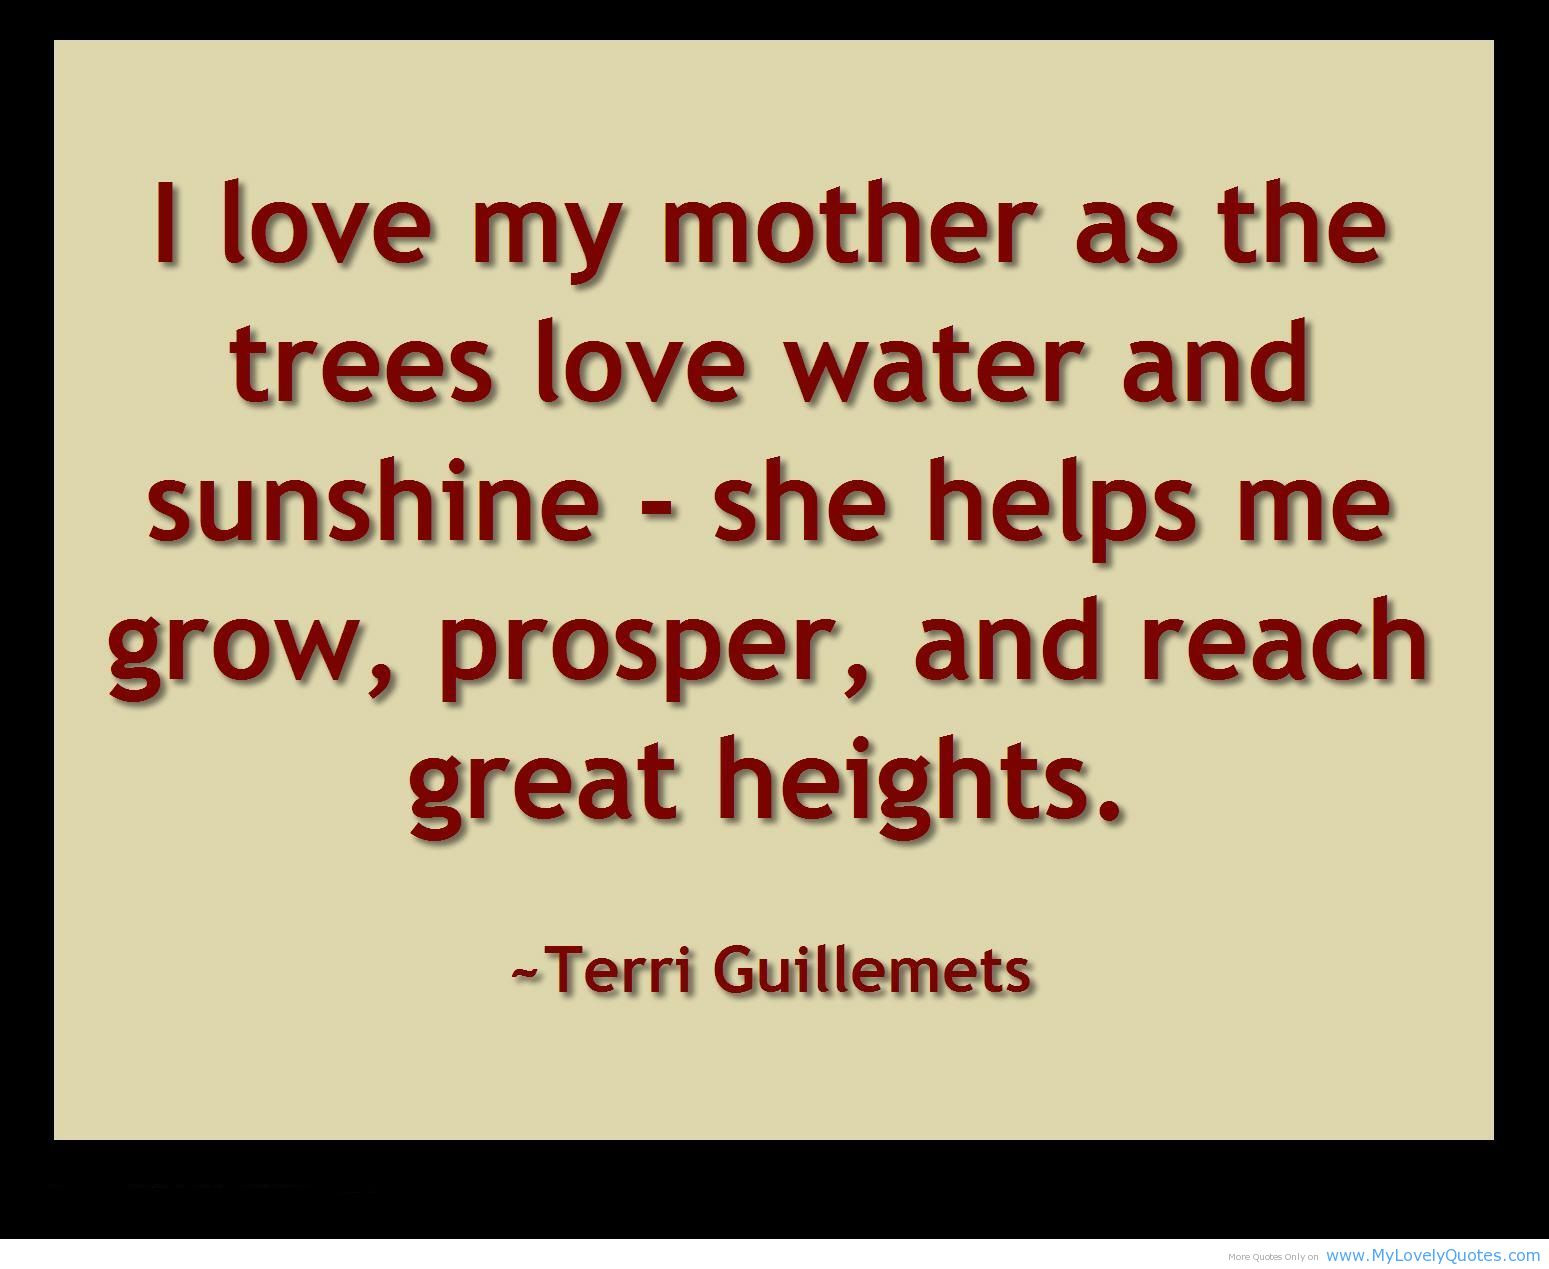 Quotes On Motherly Love
 Quotes About Mothers Love QuotesGram